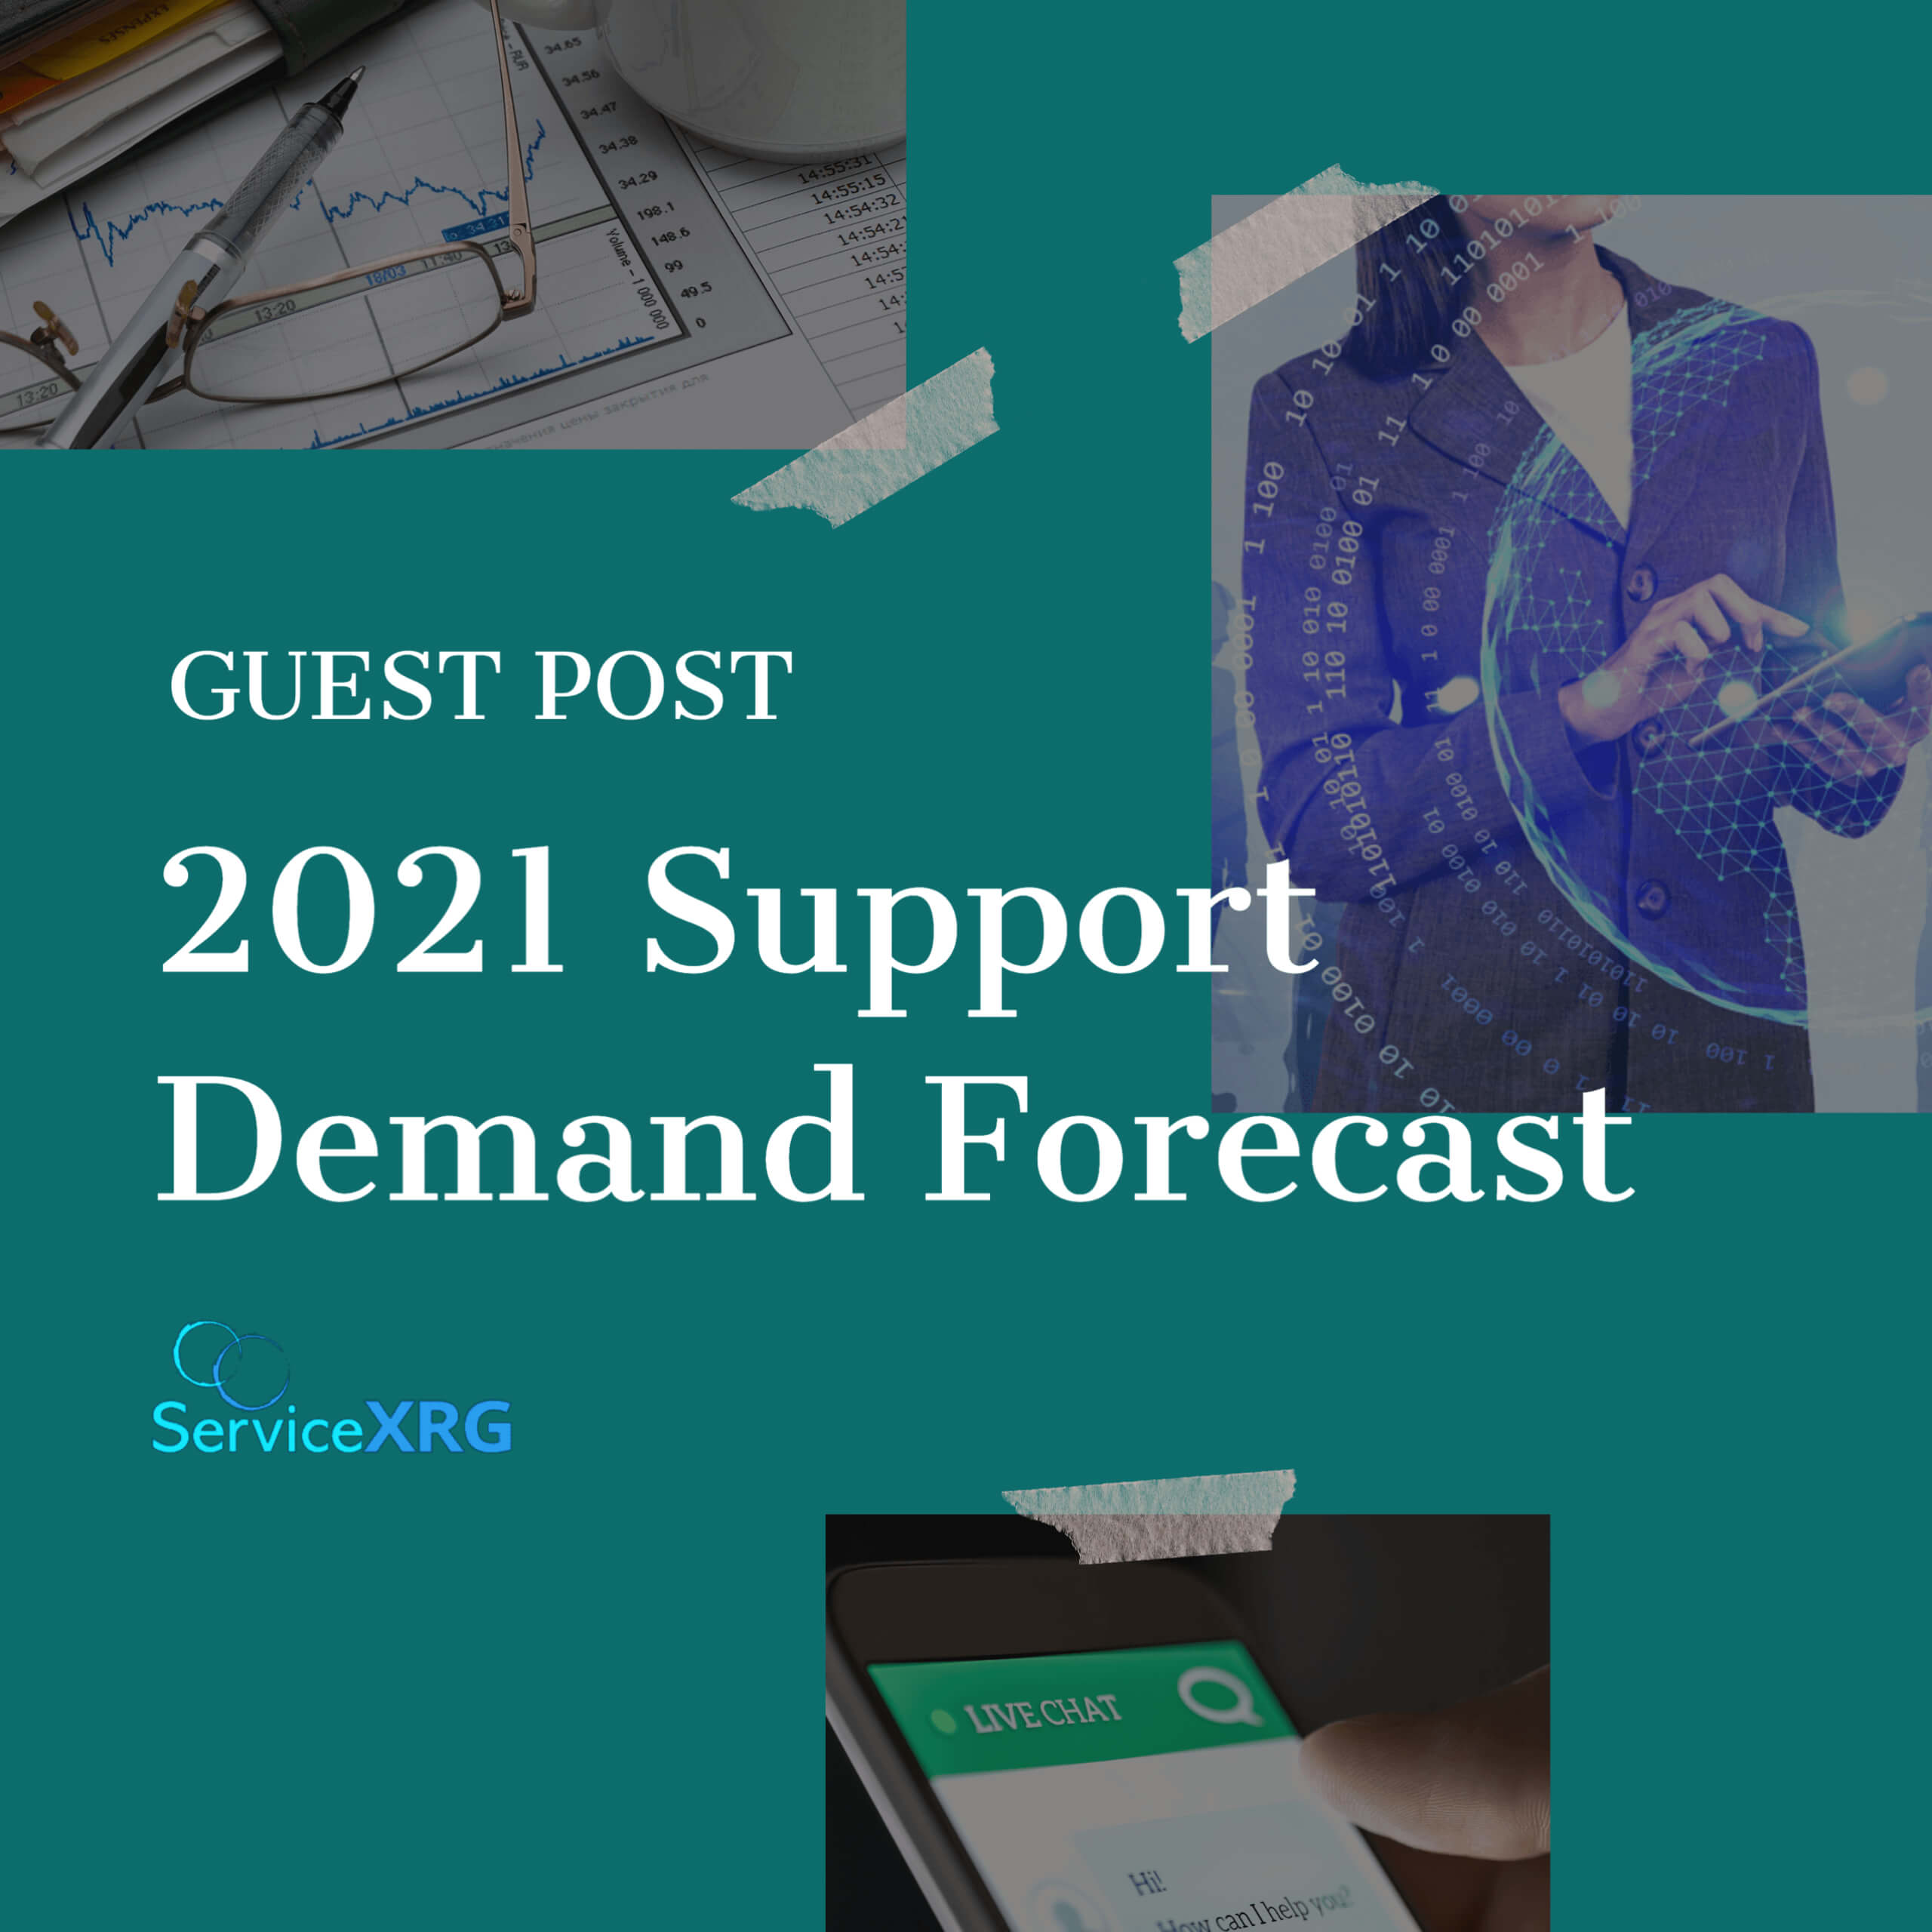 support demand forecast guest blog on blue background with images of forecasting and customer support tools